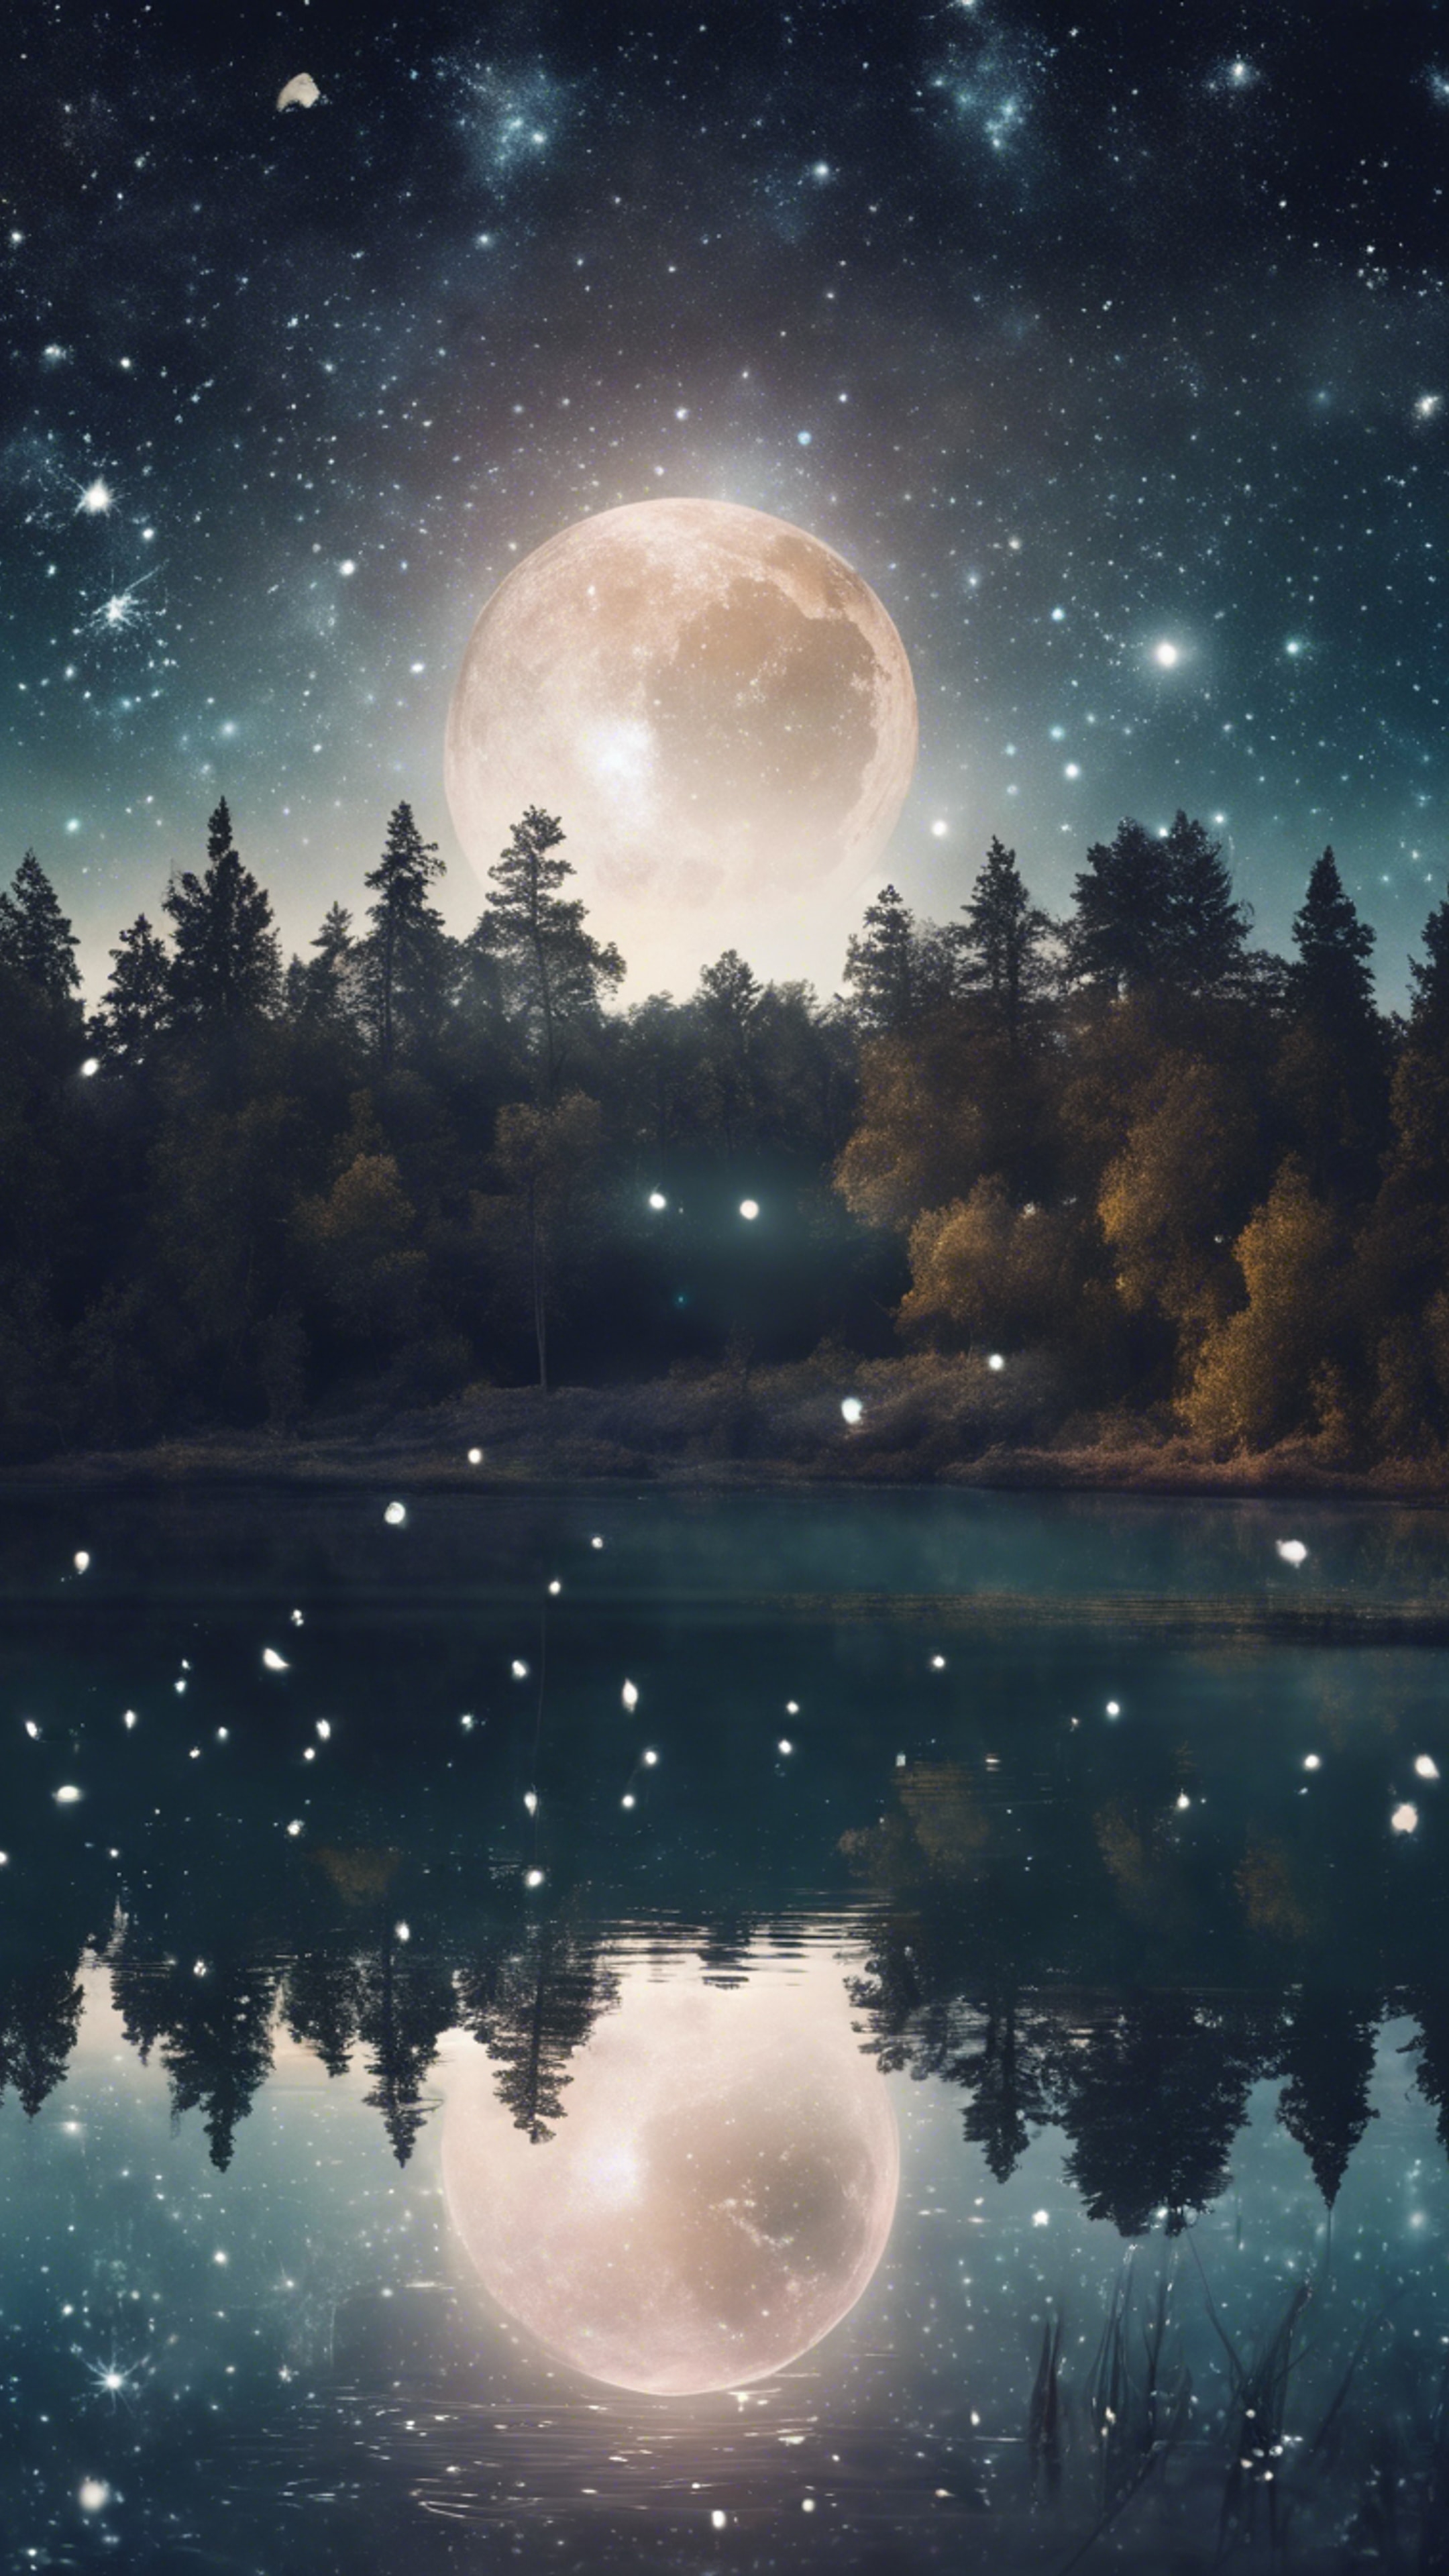 A mystical night sky over a tranquil lake, filled with sparkling constellations and a magical, translucent moon. Tapeta[02f115e6e6dc4626b628]